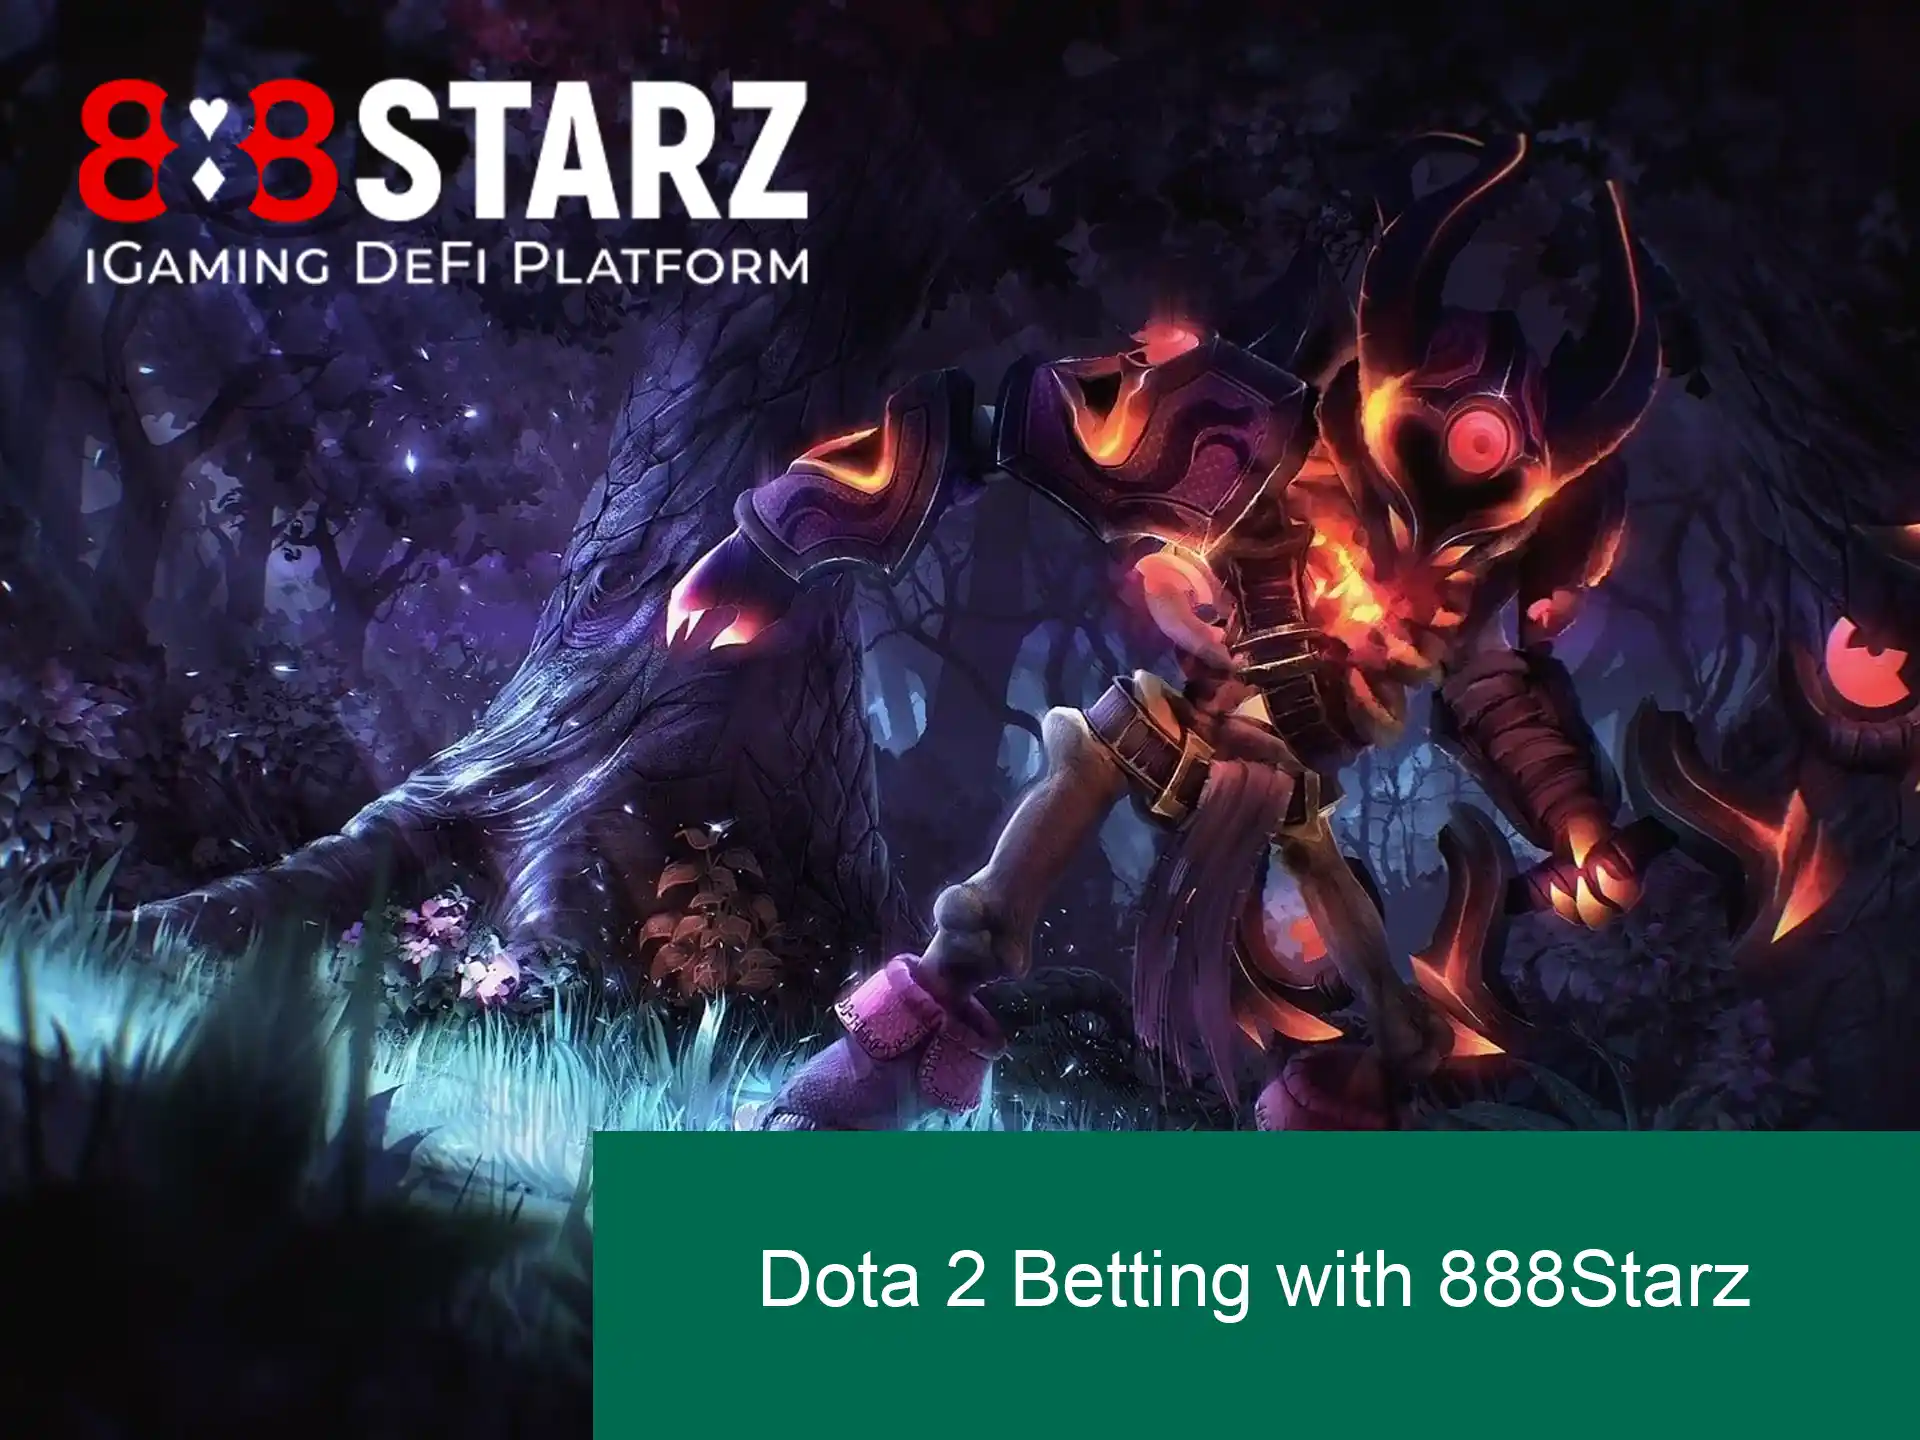 The company 888Starz gives you the opportunity to bet on Dota 2.